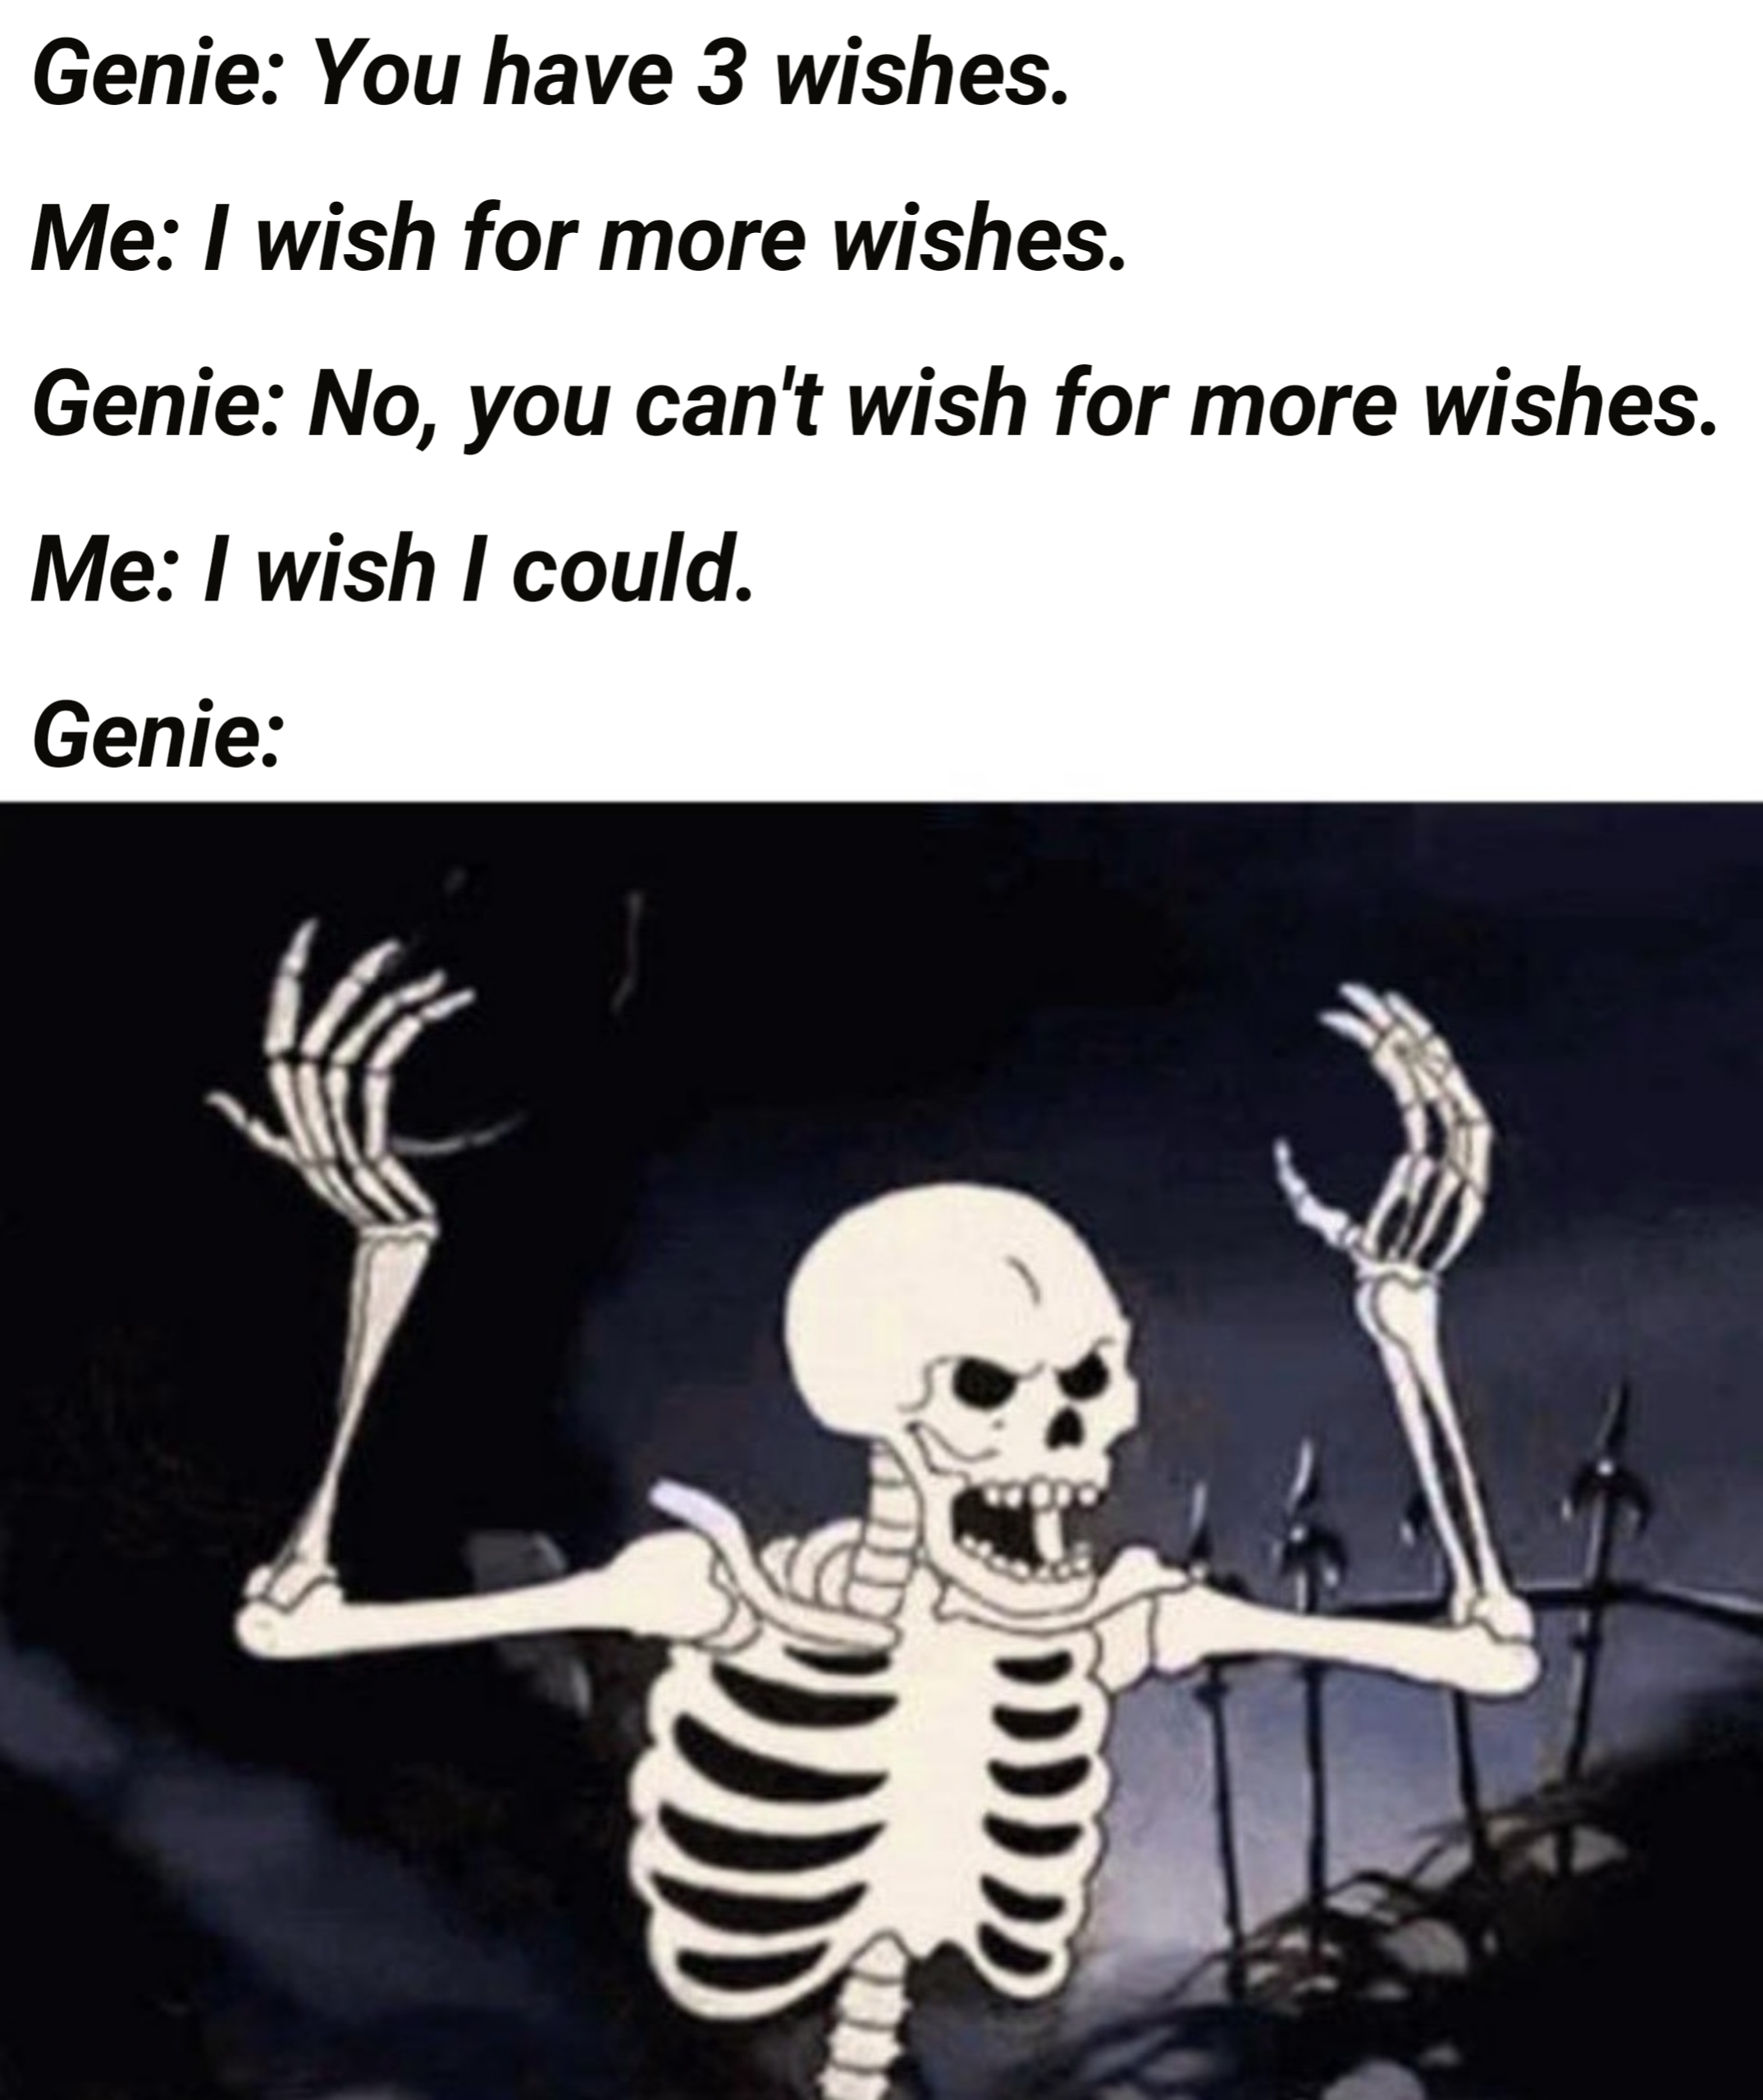 tomorrow is october meme - Genie You have 3 wishes. Me I wish for more wishes. Genie No, you can't wish for more wishes. Me I wish I could. Genie